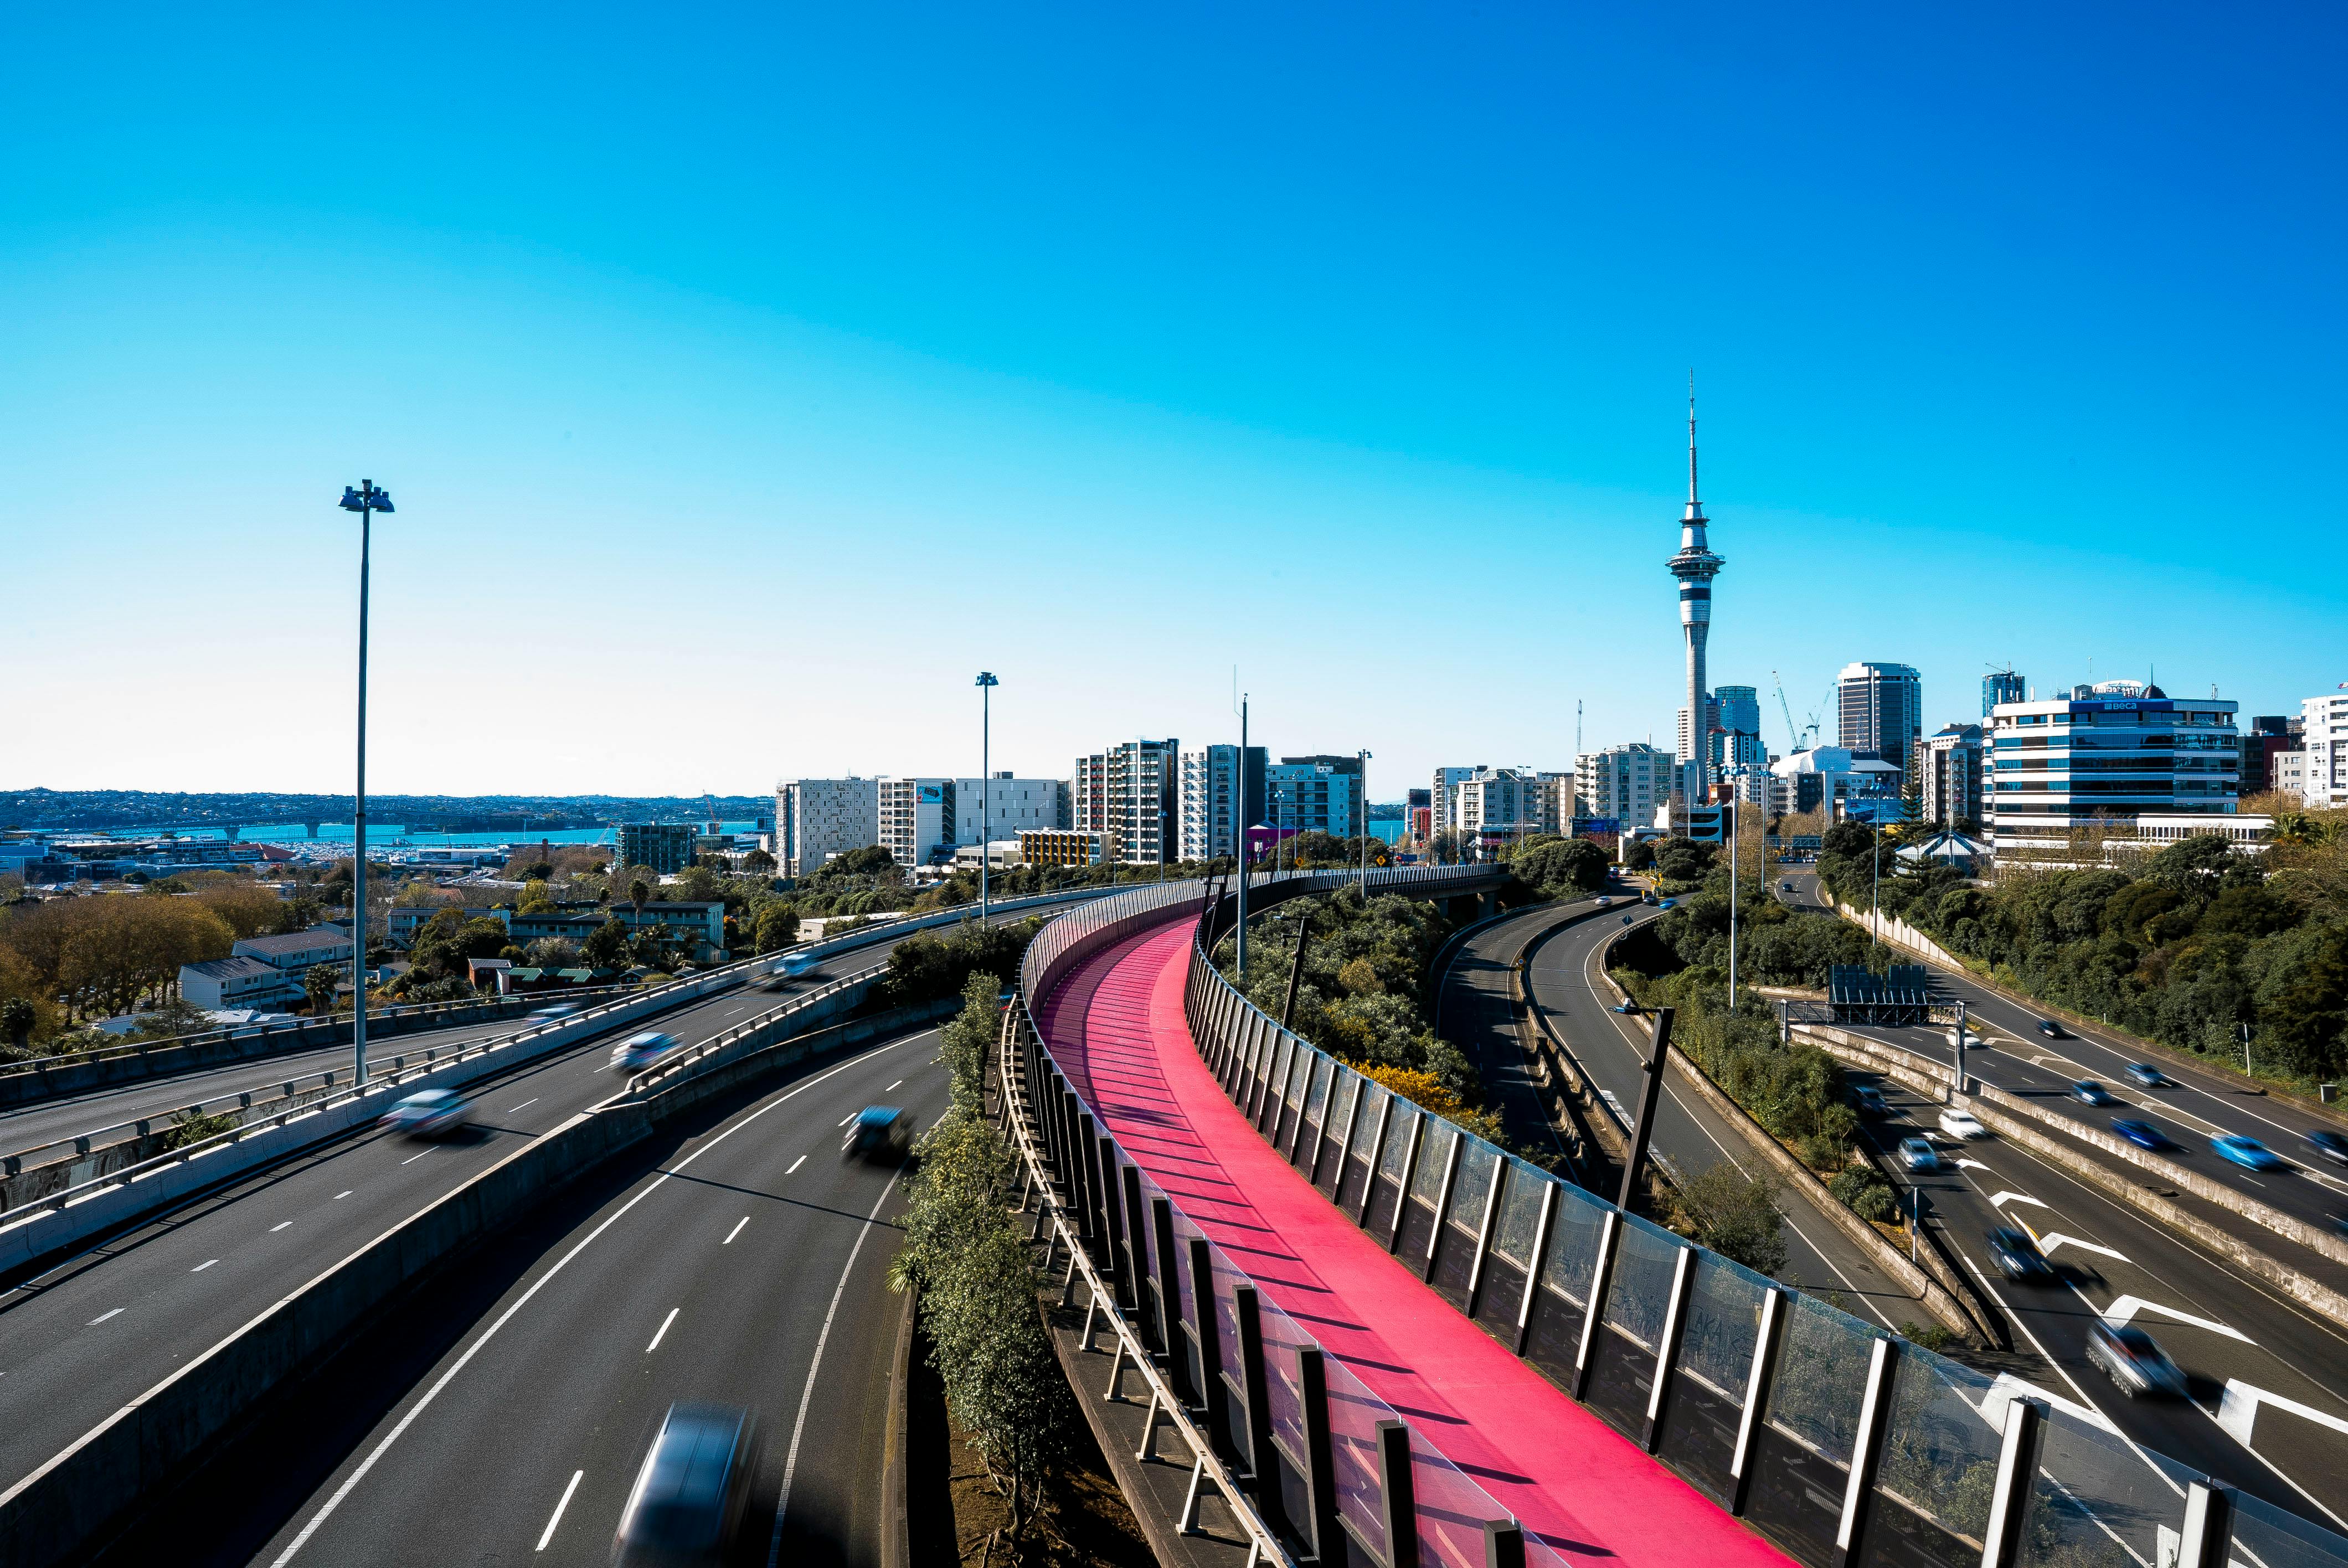 500 Auckland Pictures  Download Free Images on Unsplash